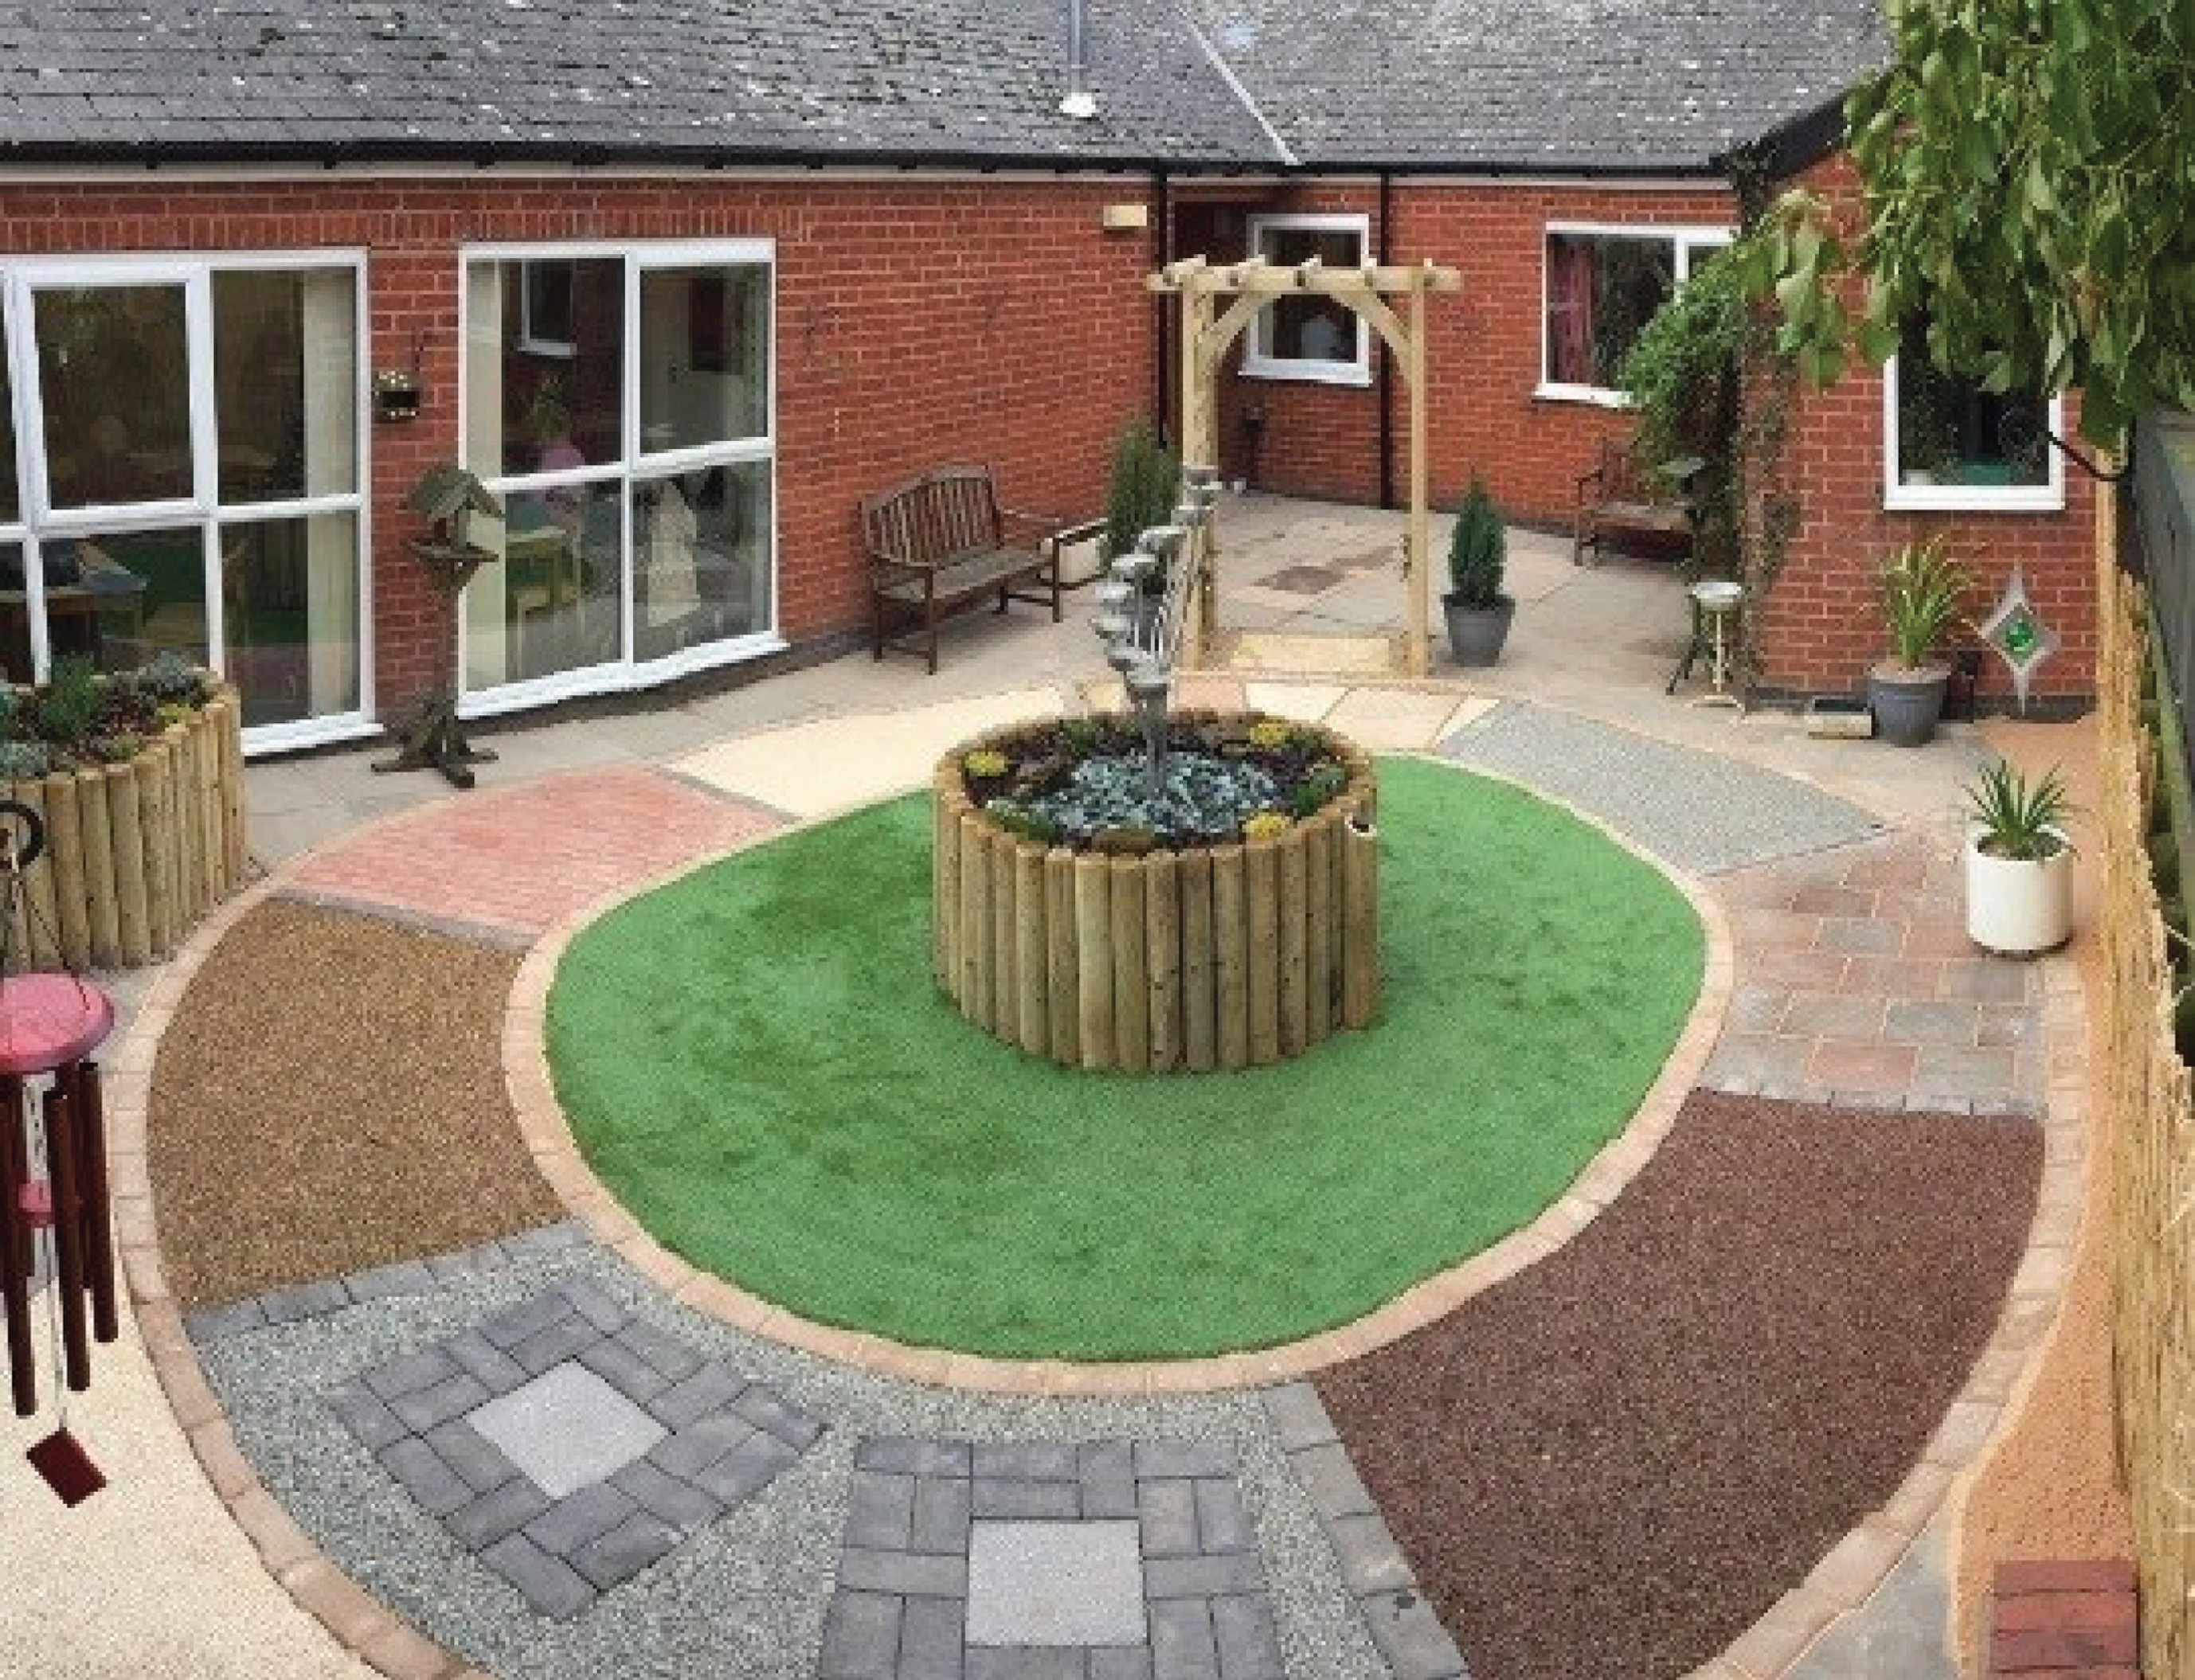 A looped pathway design in an outdoor garden. Reprinted from Google Free Images.